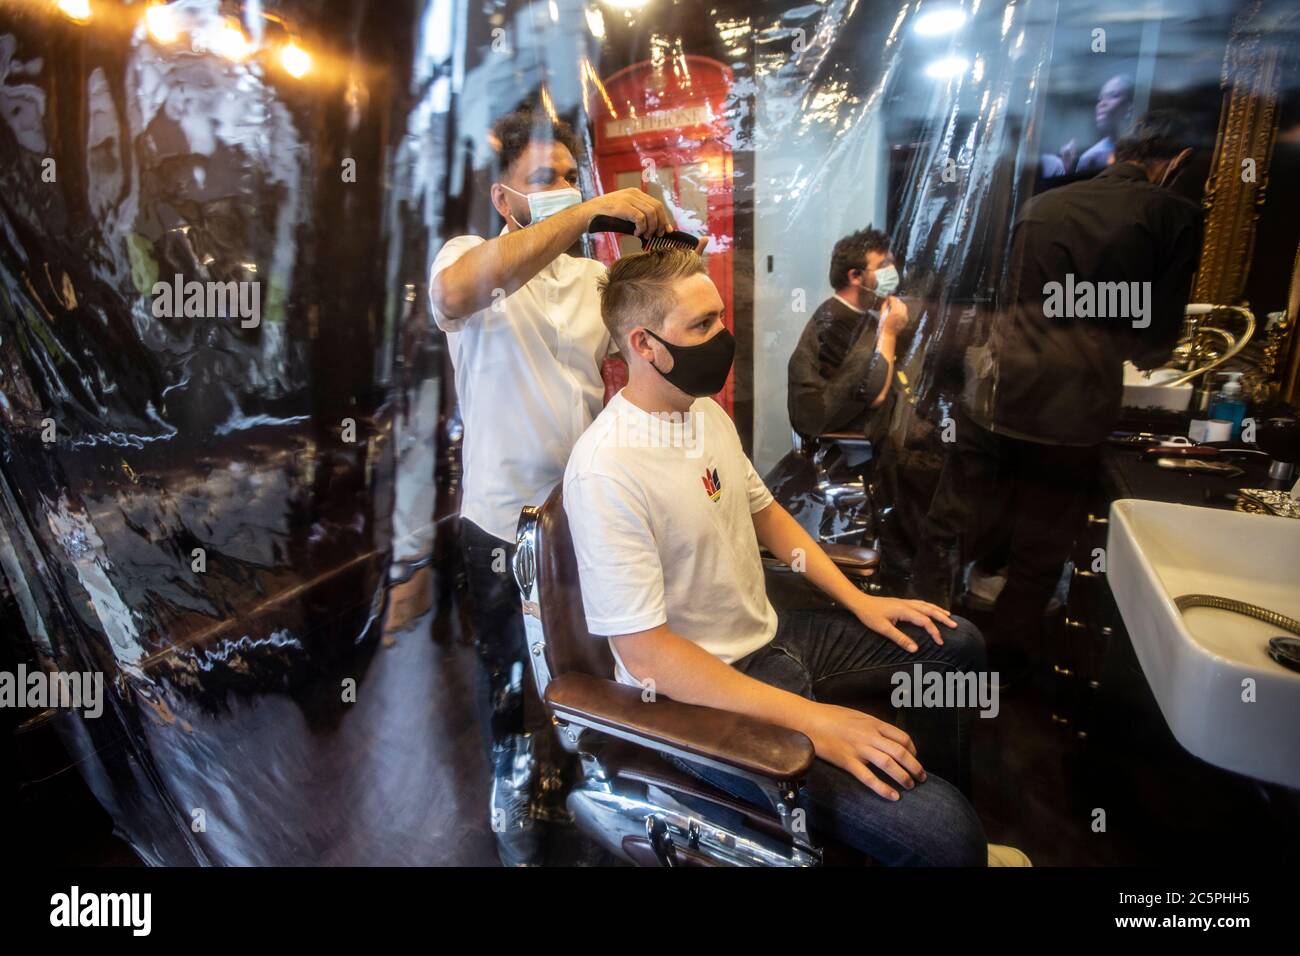 Gentleman's Barber hair salon reopened with precautionary plastic sheeting and stylist wearing face masks after the coronavirus lockdown restrictions. Stock Photo